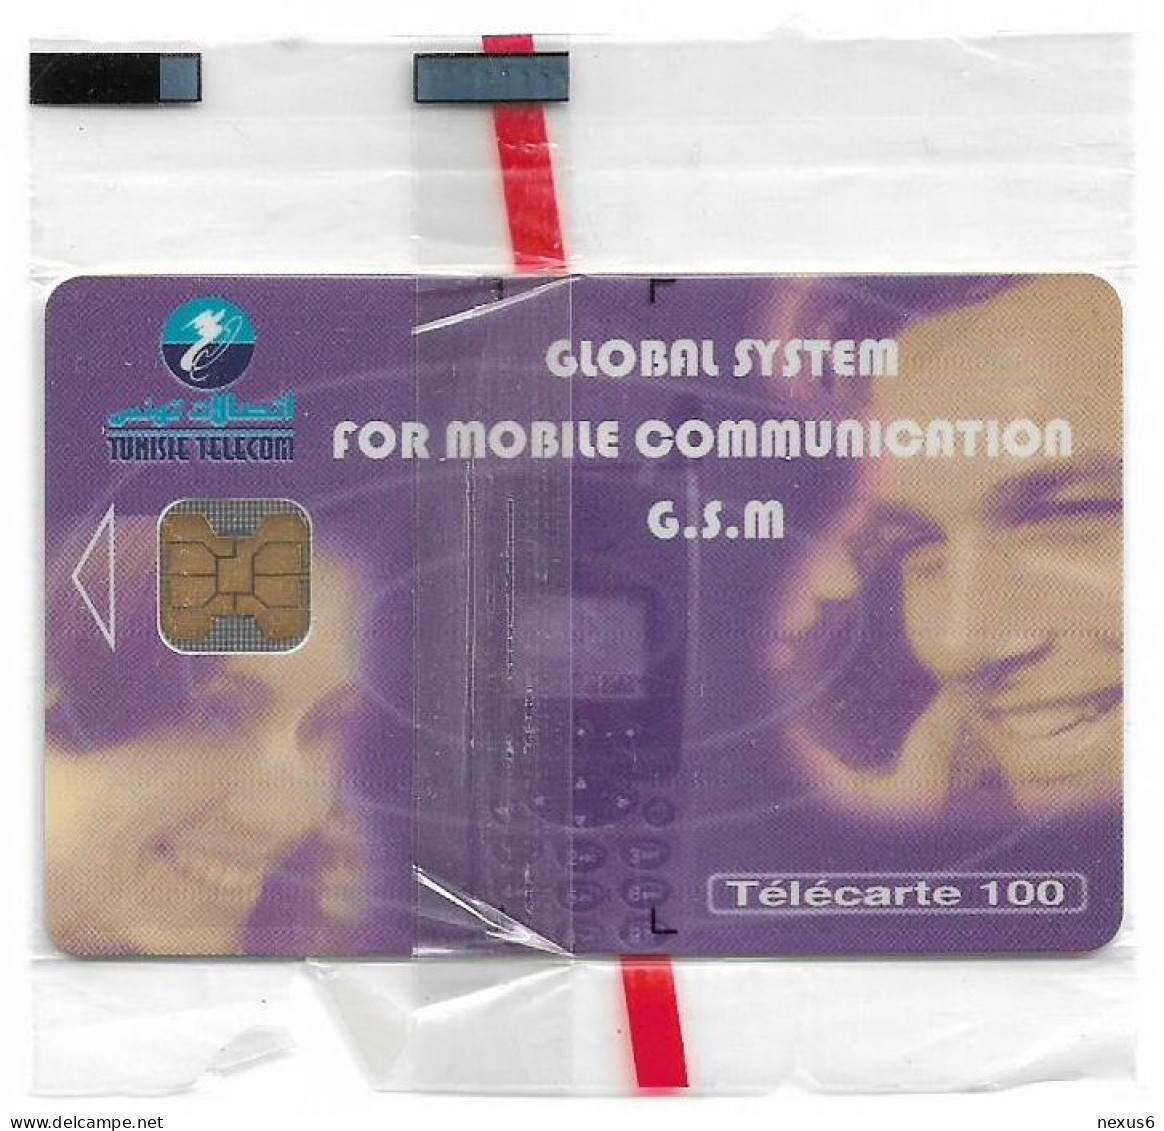 Tunisia - Tunisie Telecom - Global System For Mobile Comm., 100Units, Chip Oberthur, 01.2000, 30.000ex, NSB - Tunesien